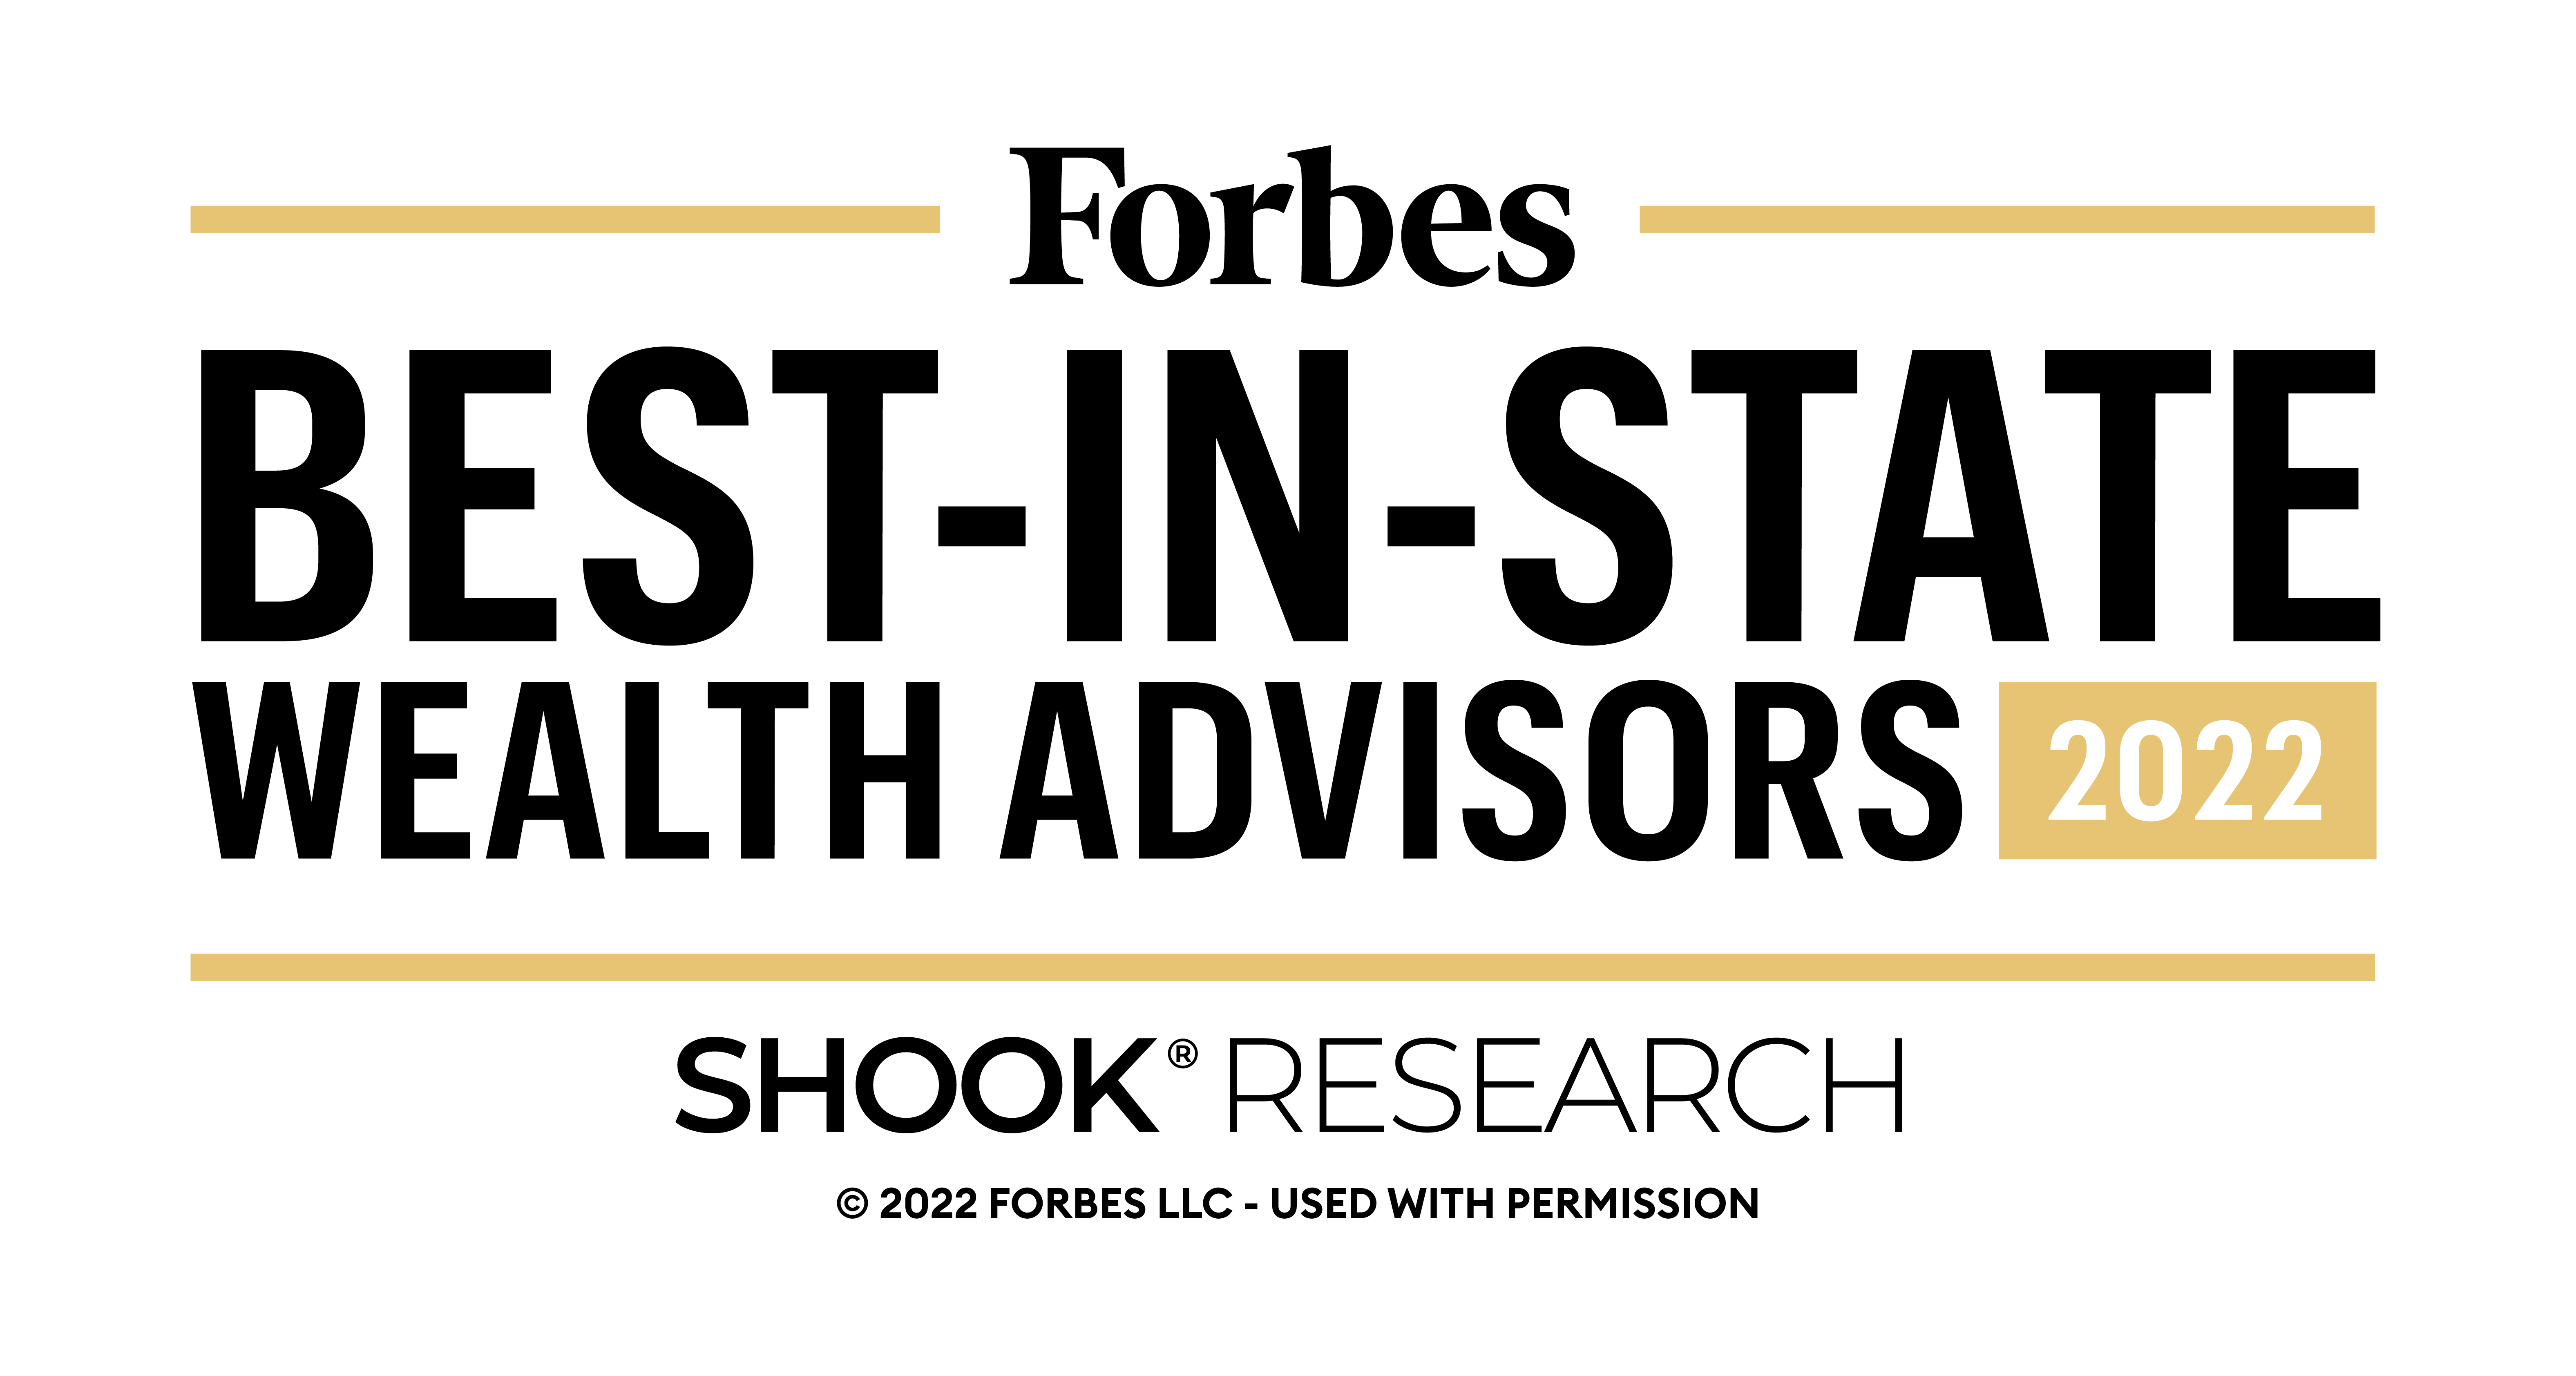 Forbes Best-In-State Wealth Advisors